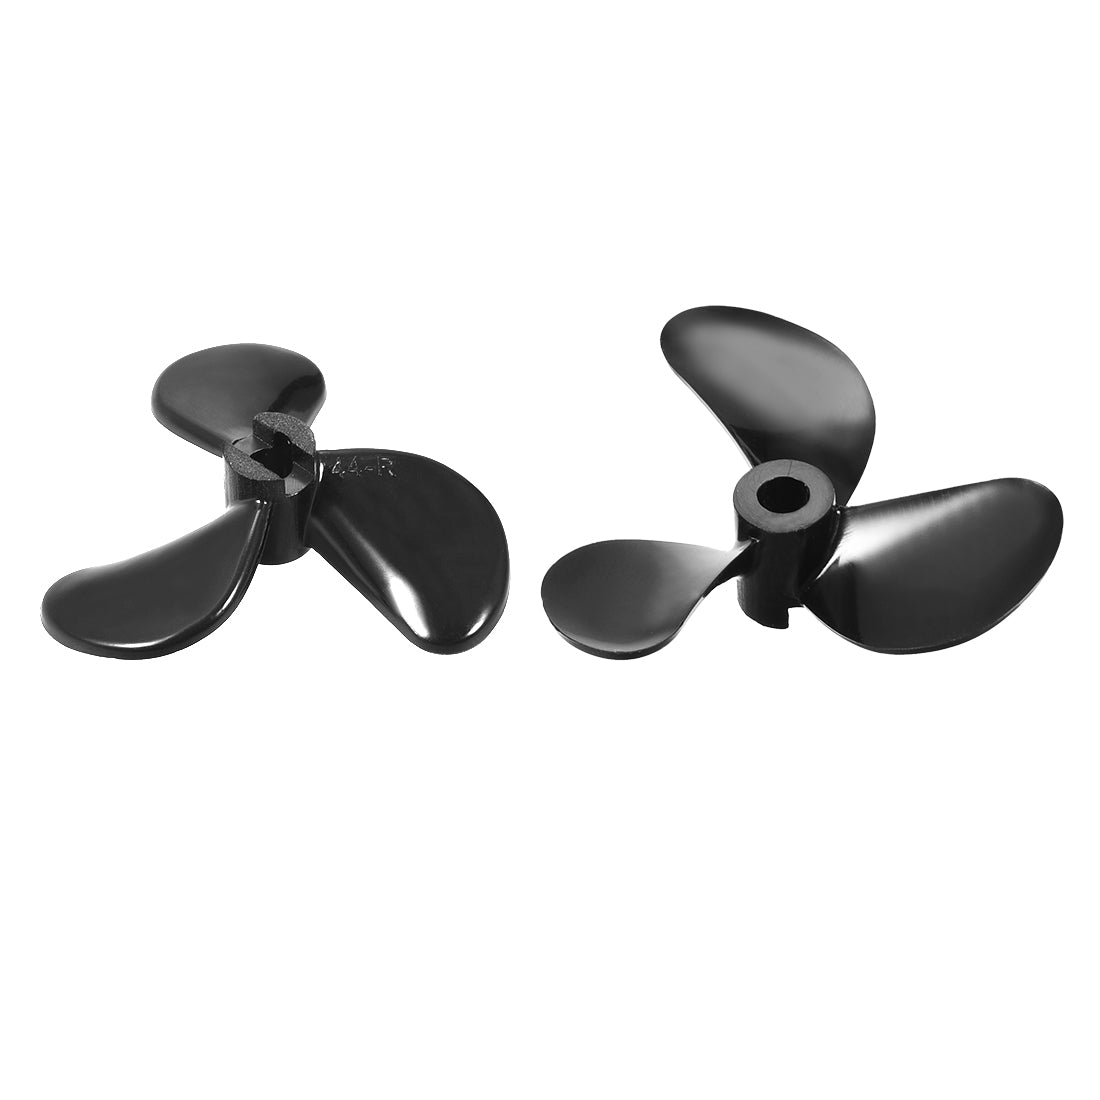 uxcell Uxcell RC Boat CCW Propeller 4mm Shaft 3 Vanes 44mm 1.4 P Fan Shape Pastic Black Rotating Propeller Props for RC Boat 2pcs